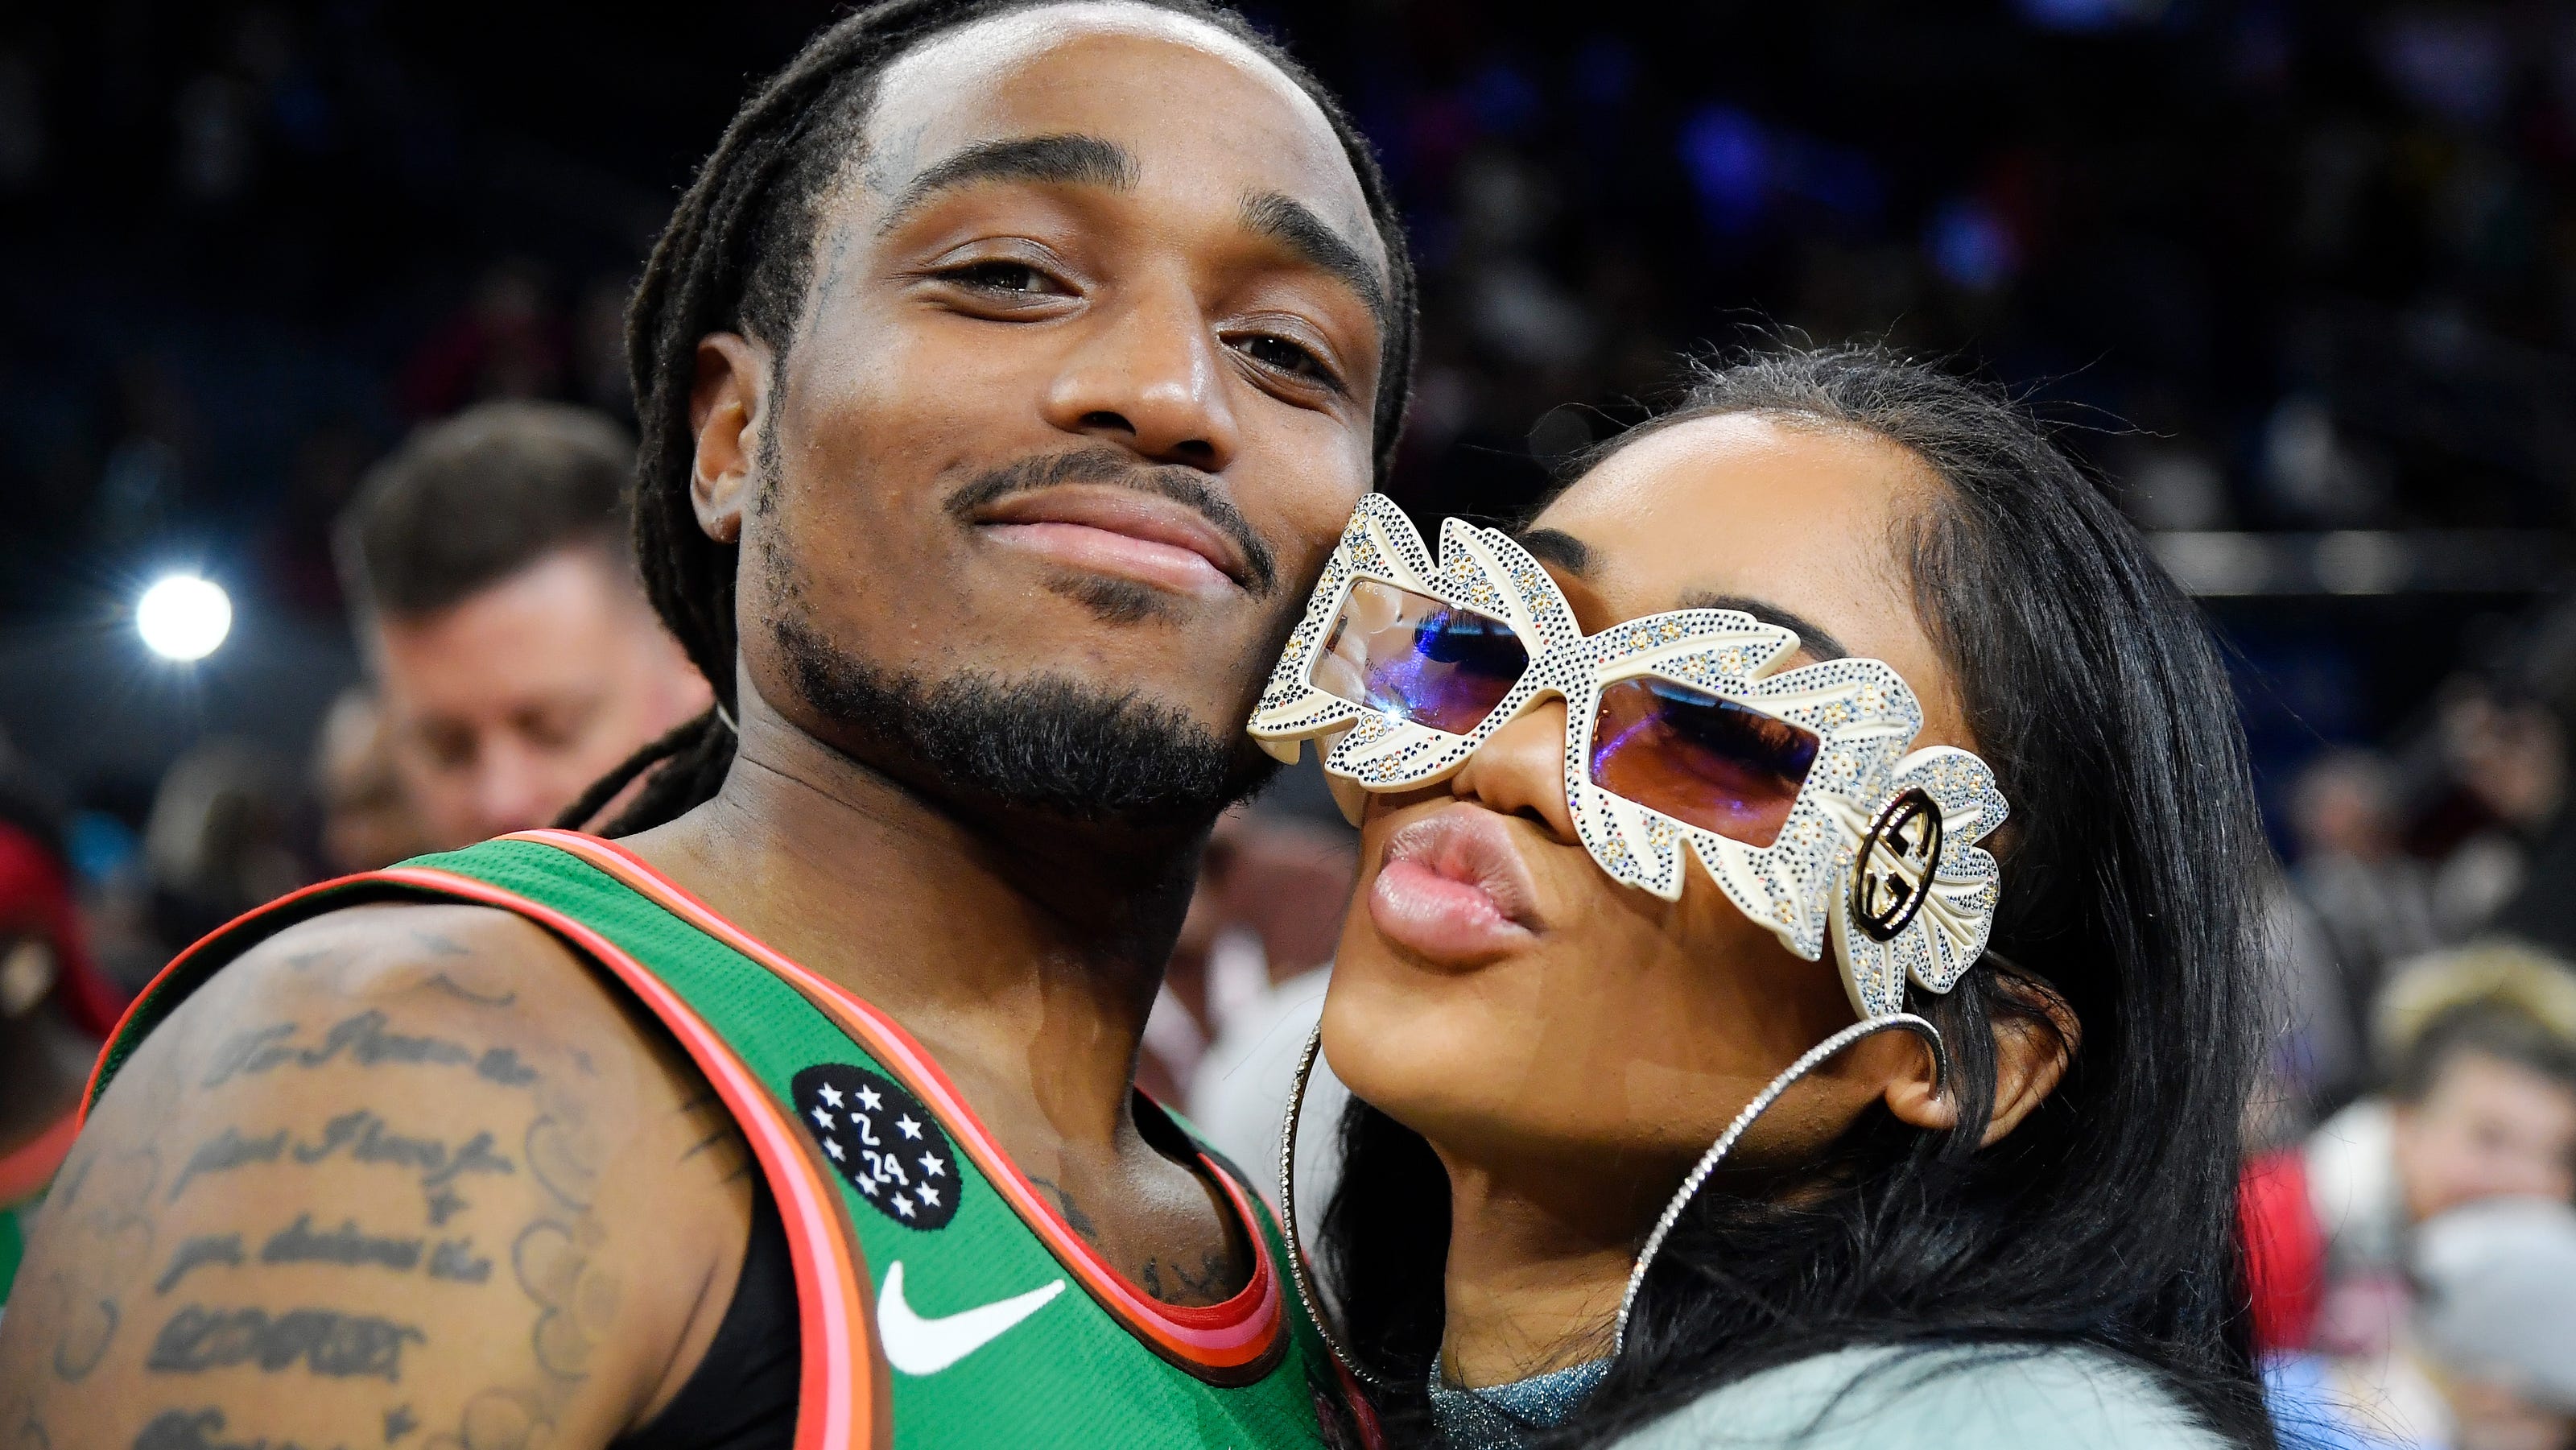 Saweetie Breaks Silence On Physical Altercation In Elevator With Quavo